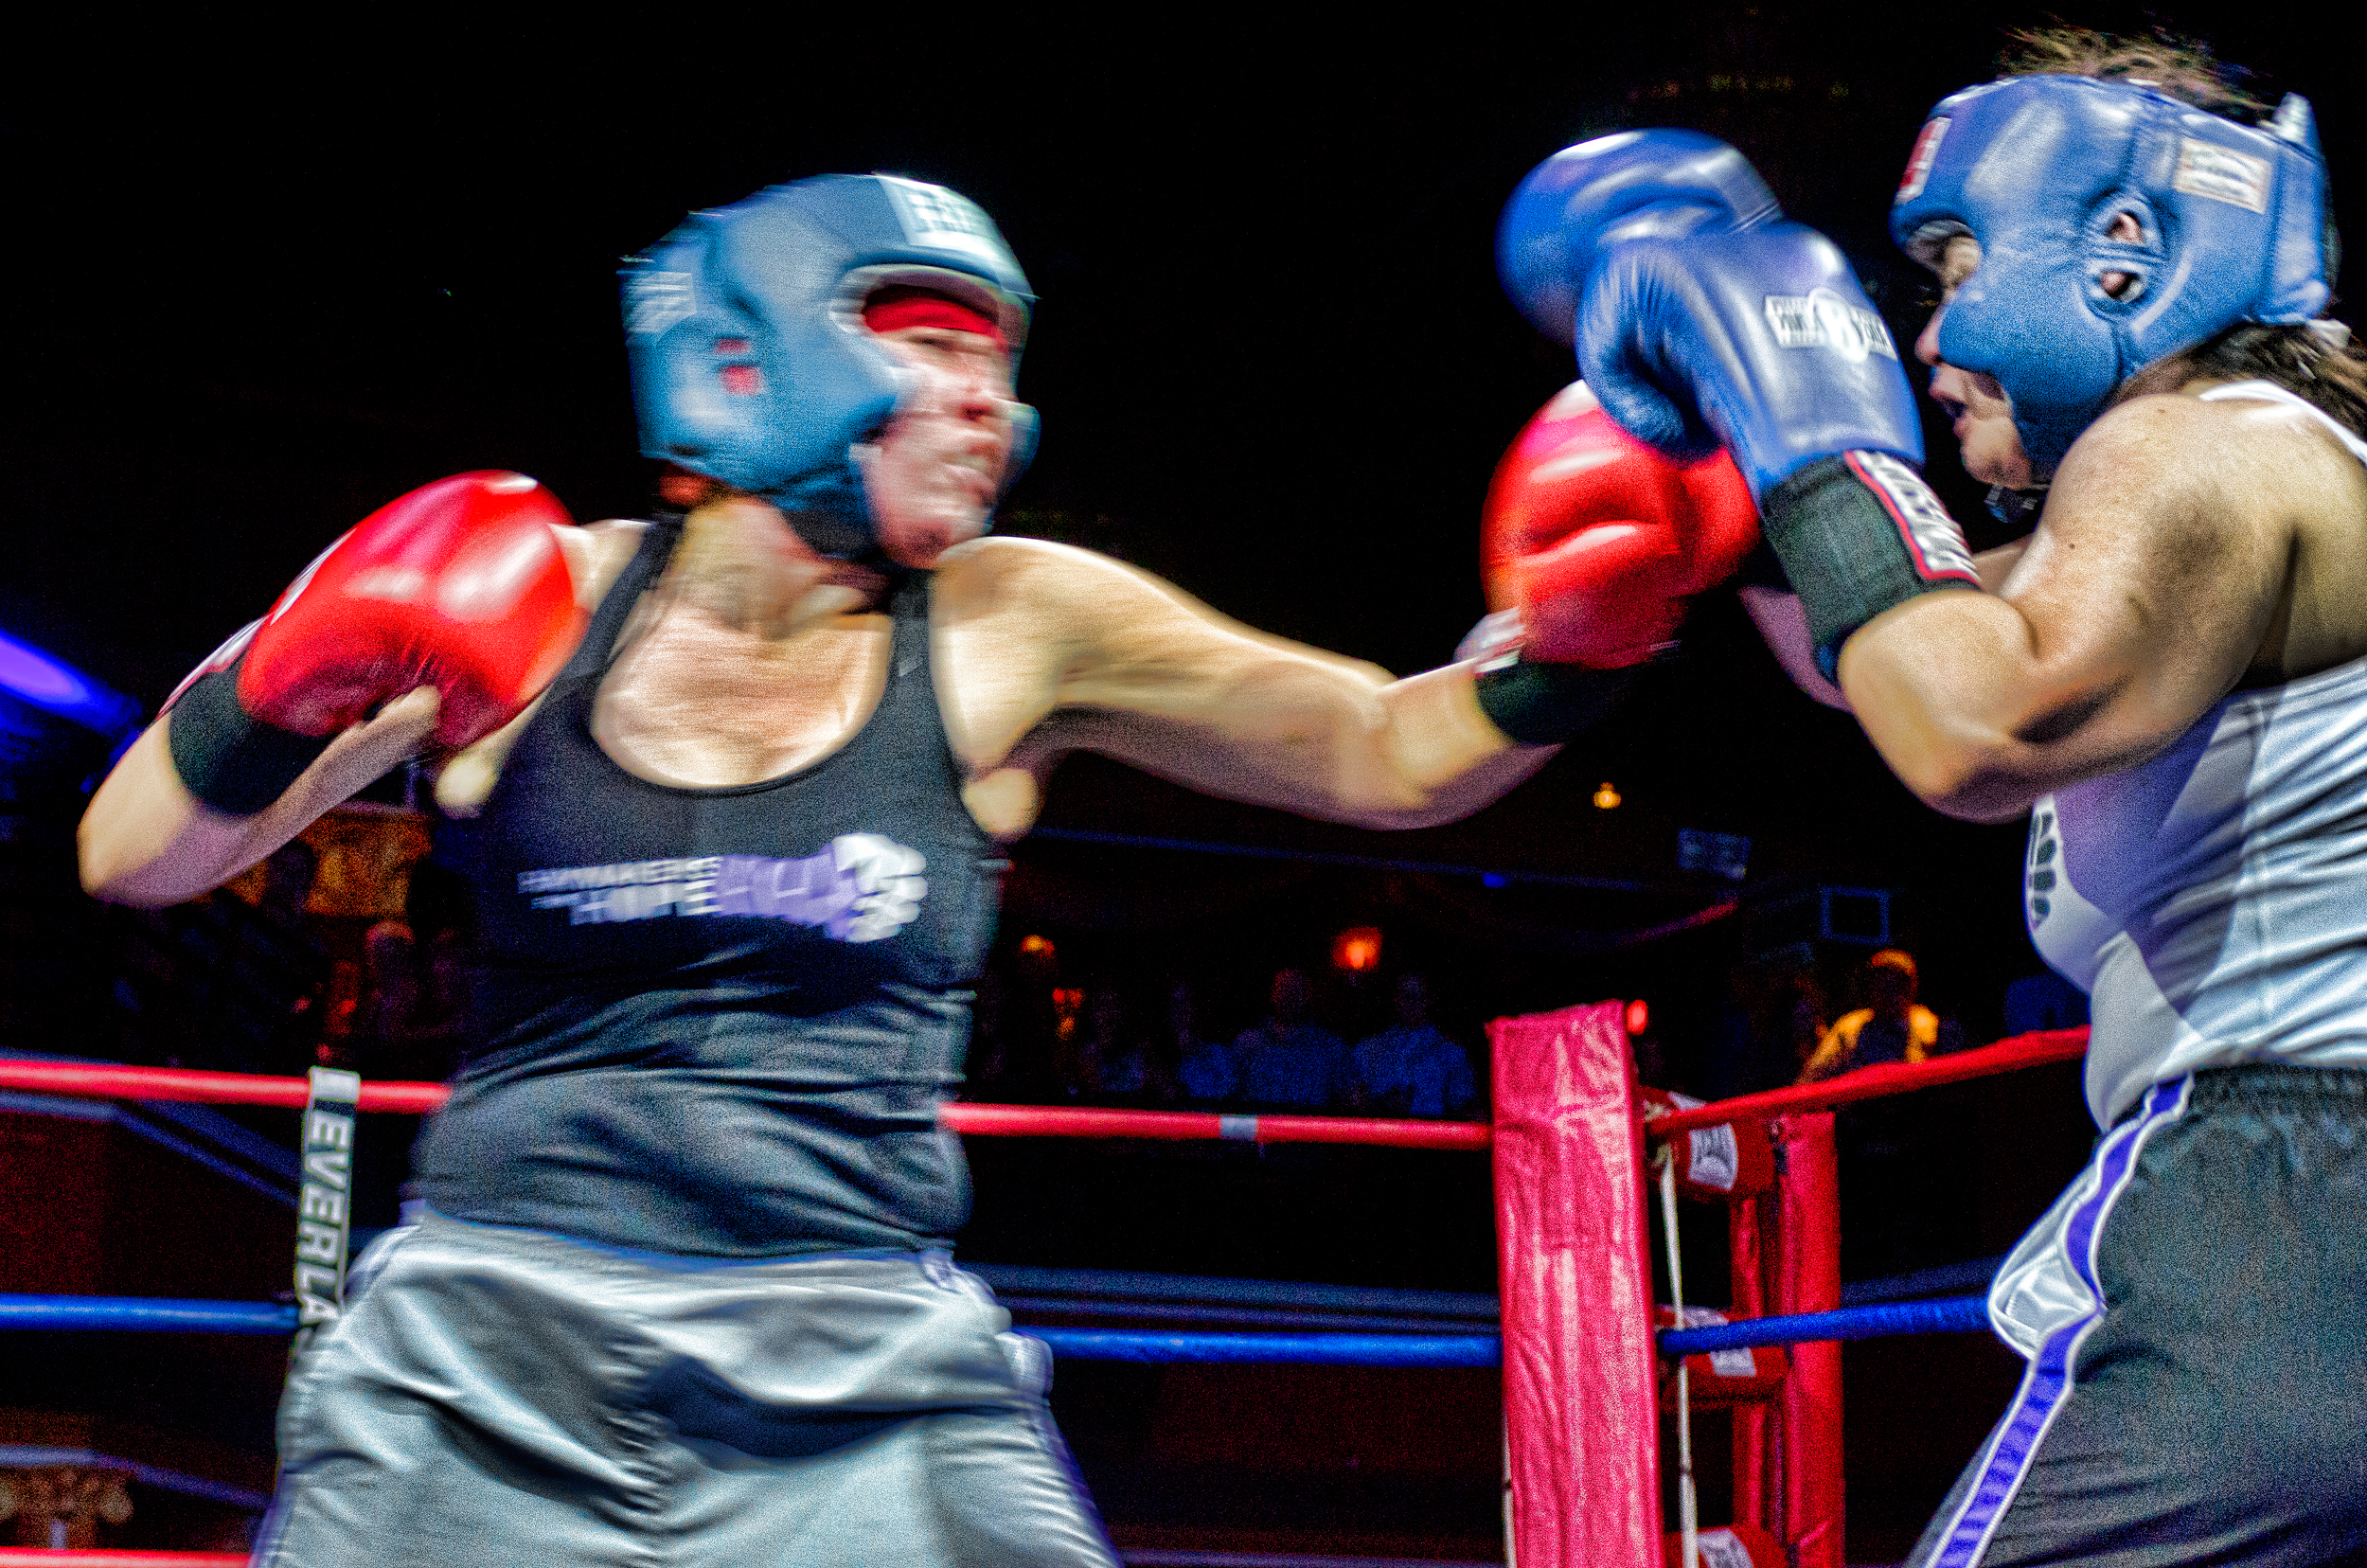  Haymakers for Hope. Women box in support of cancer research. 